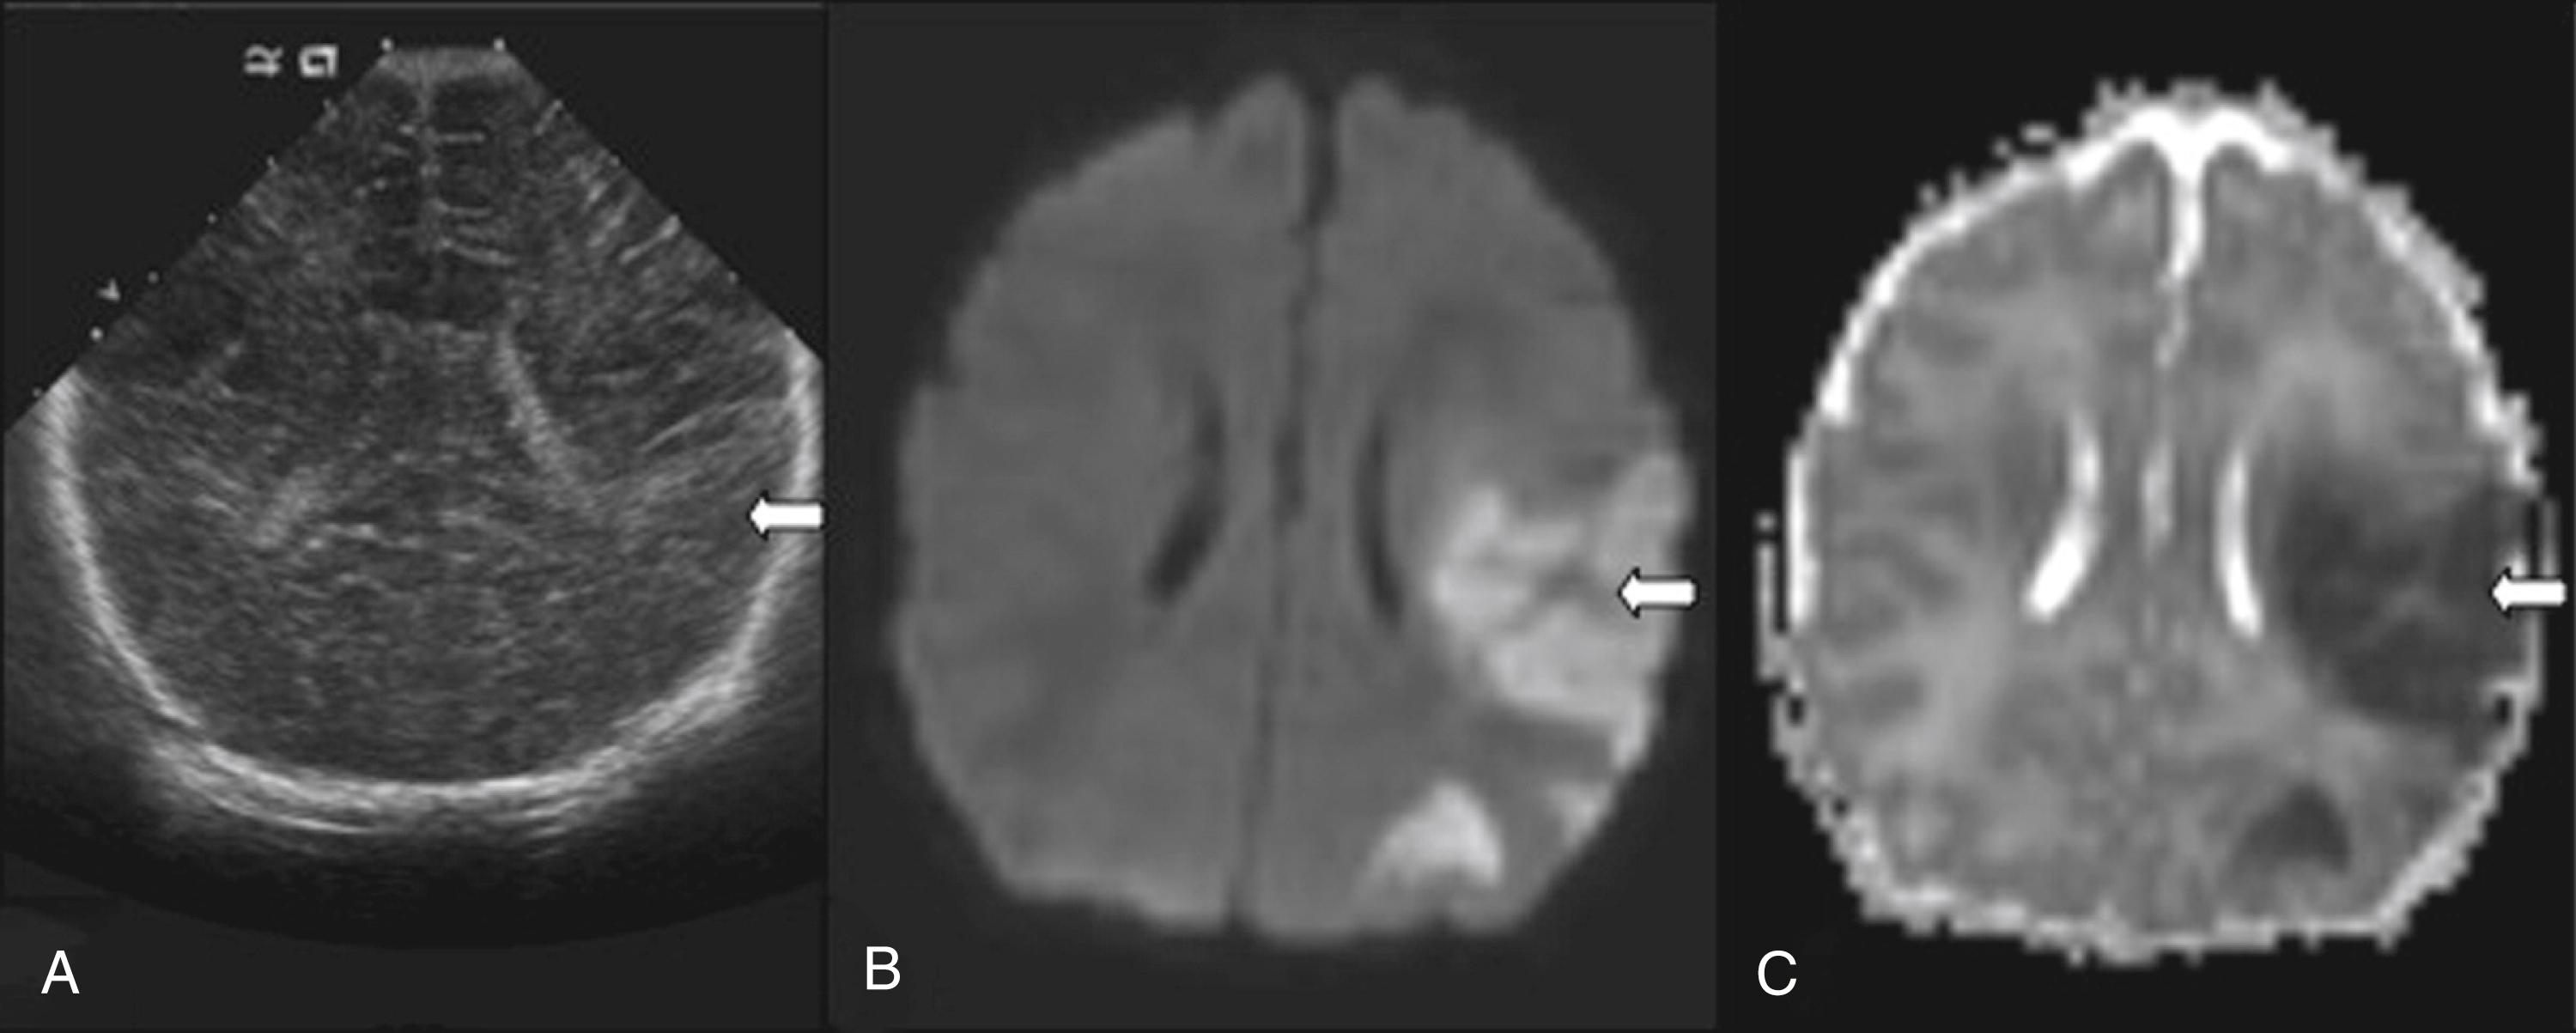 Fig. 37.11, Neonatal arterial ischemic stroke. Ultrasound (US) and MRI of neonatal arterial ischemic stroke in a 1-day-old term infant who presented with a right focal seizure. A, US reveals hyperechogenicity in the left cerebral hemisphere (indicated by white arrow ), concerning for ischemic injury. B, Axial MRI diffusion-weighted trace image of the same patient reveals well-defined hyperintensity (indicated by white arrow ) in the left middle cerebral artery (MCA) territory. C, Apparent diffusion coefficient map of the matching slice observed in (B) reveals corresponding hypointensity (indicated by white arrow ) in the left MCA territory.